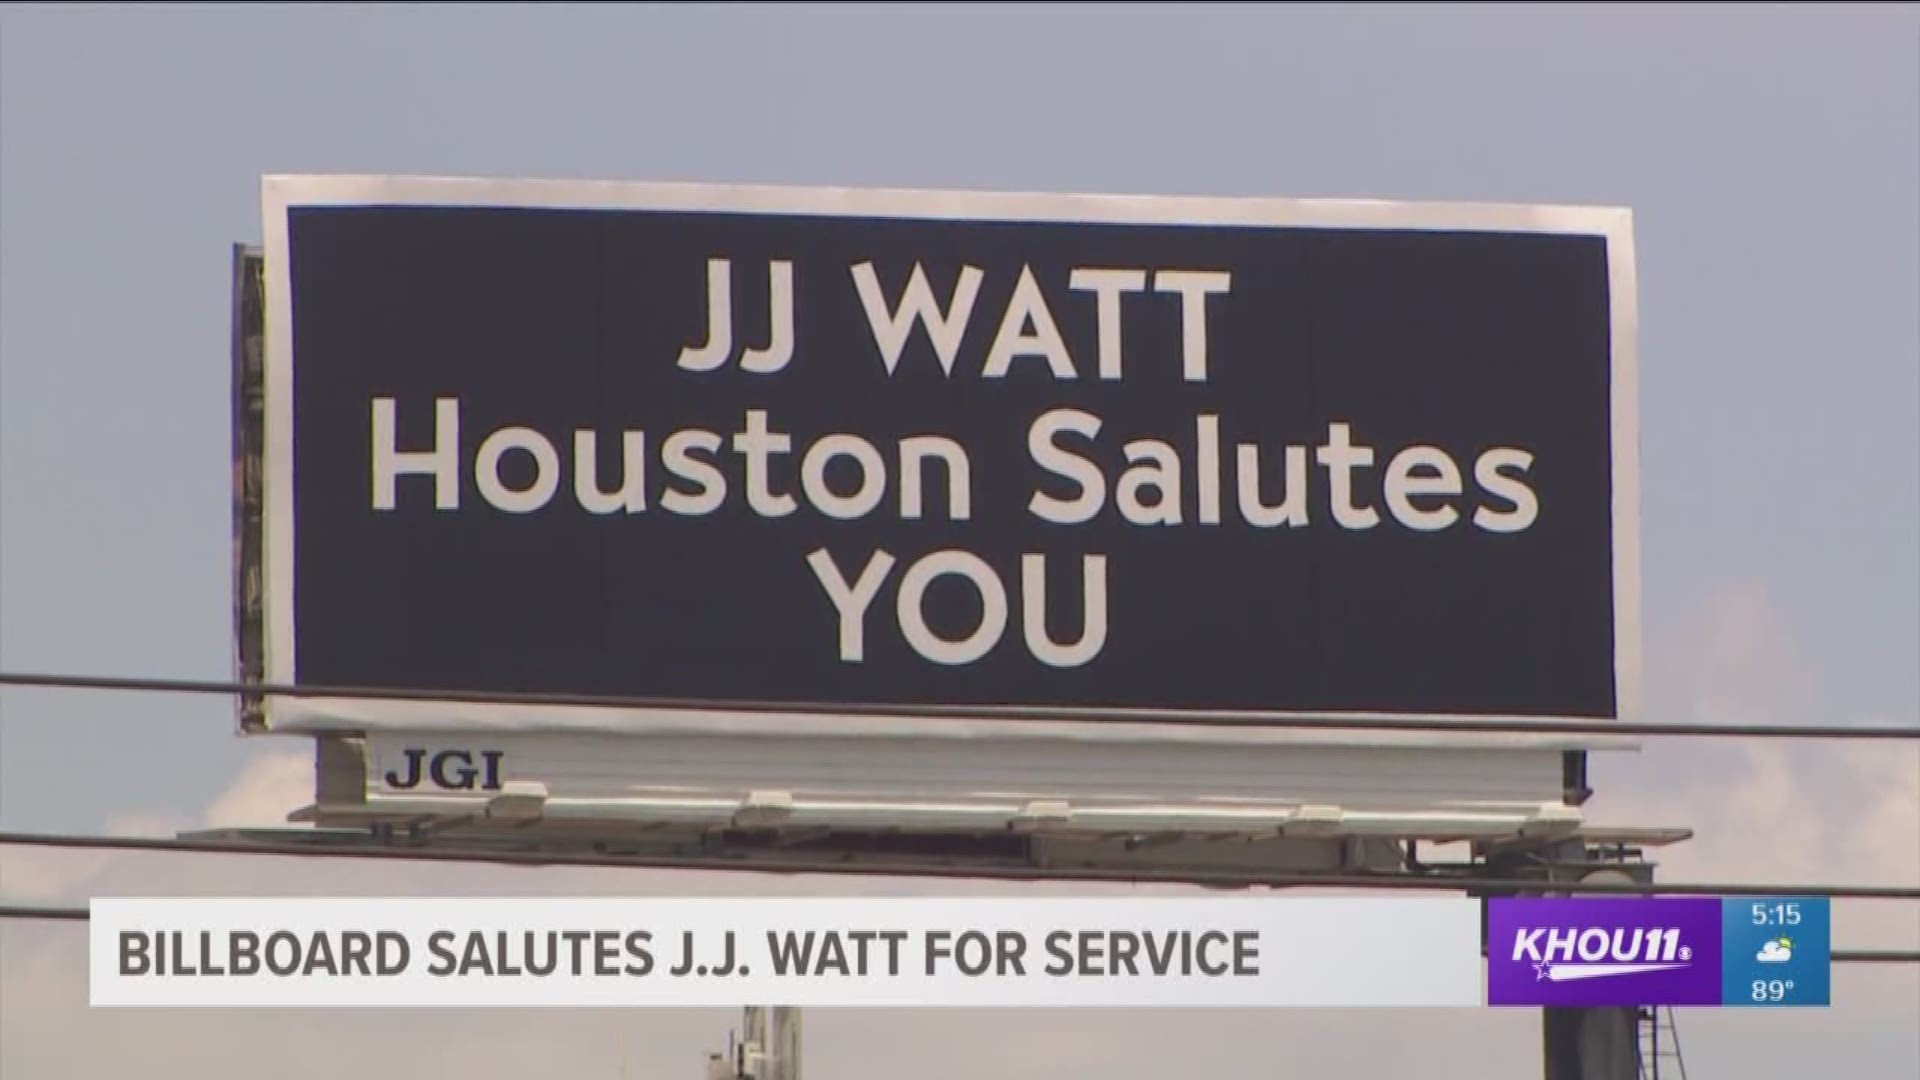 If you've driven down the Southwest Freeway in the last couple of days, you've probably seen the huge billboard saluting JJ Watt.